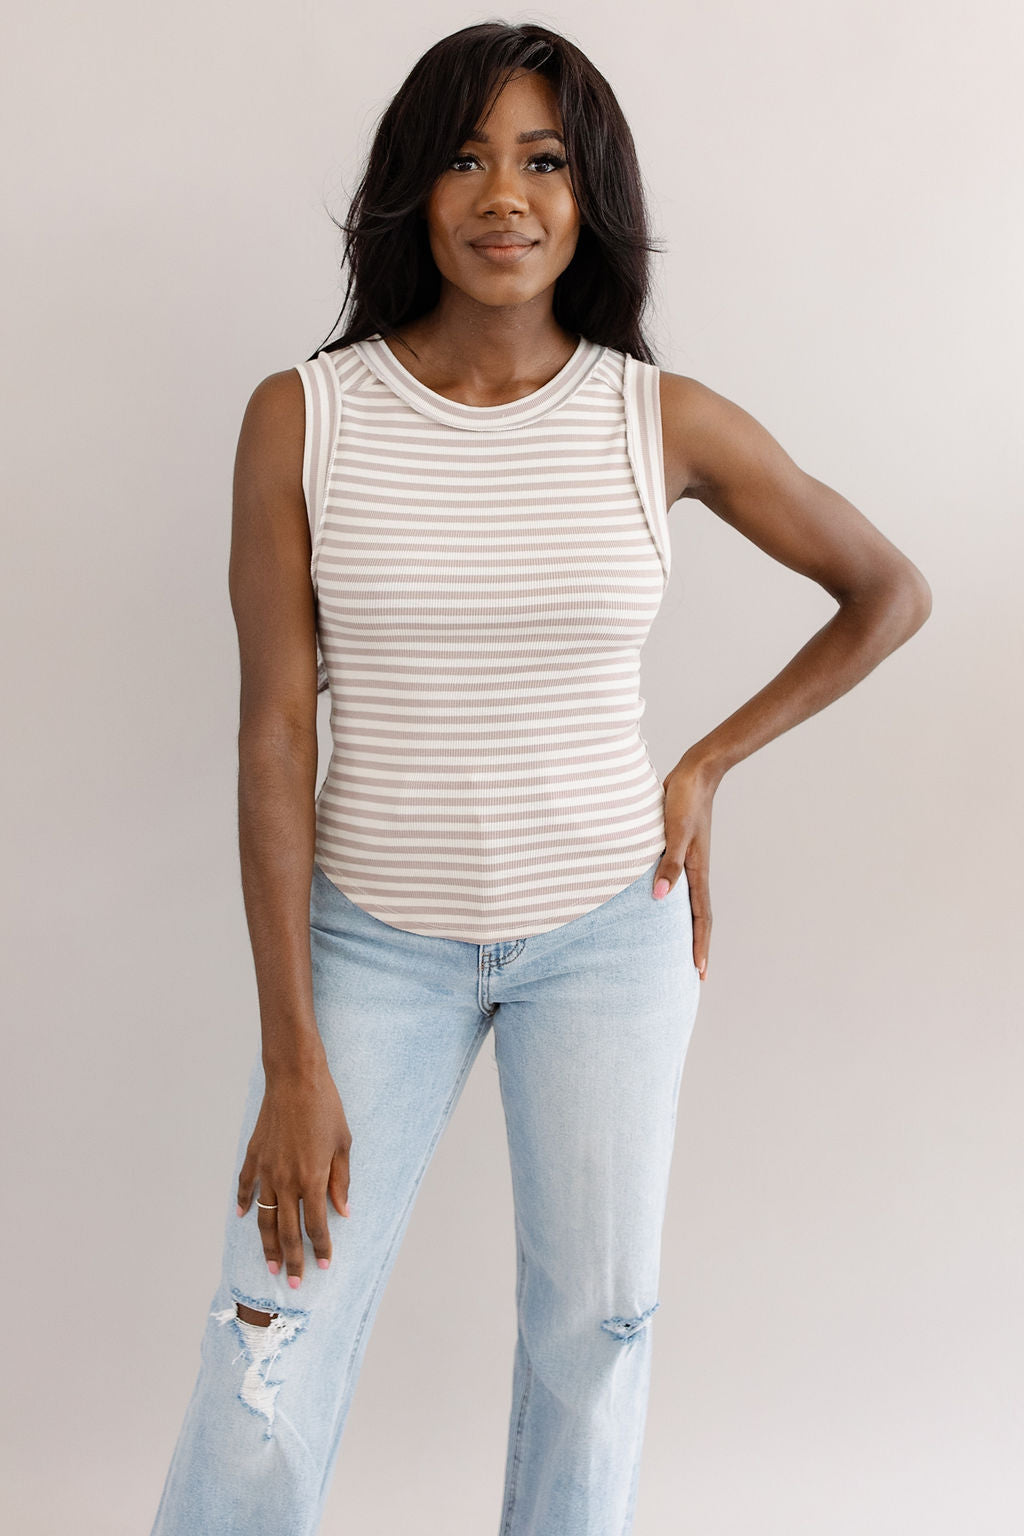 Free People | Kate Tee Striped Tank Top | Etherea Combo - Poppy and Stella